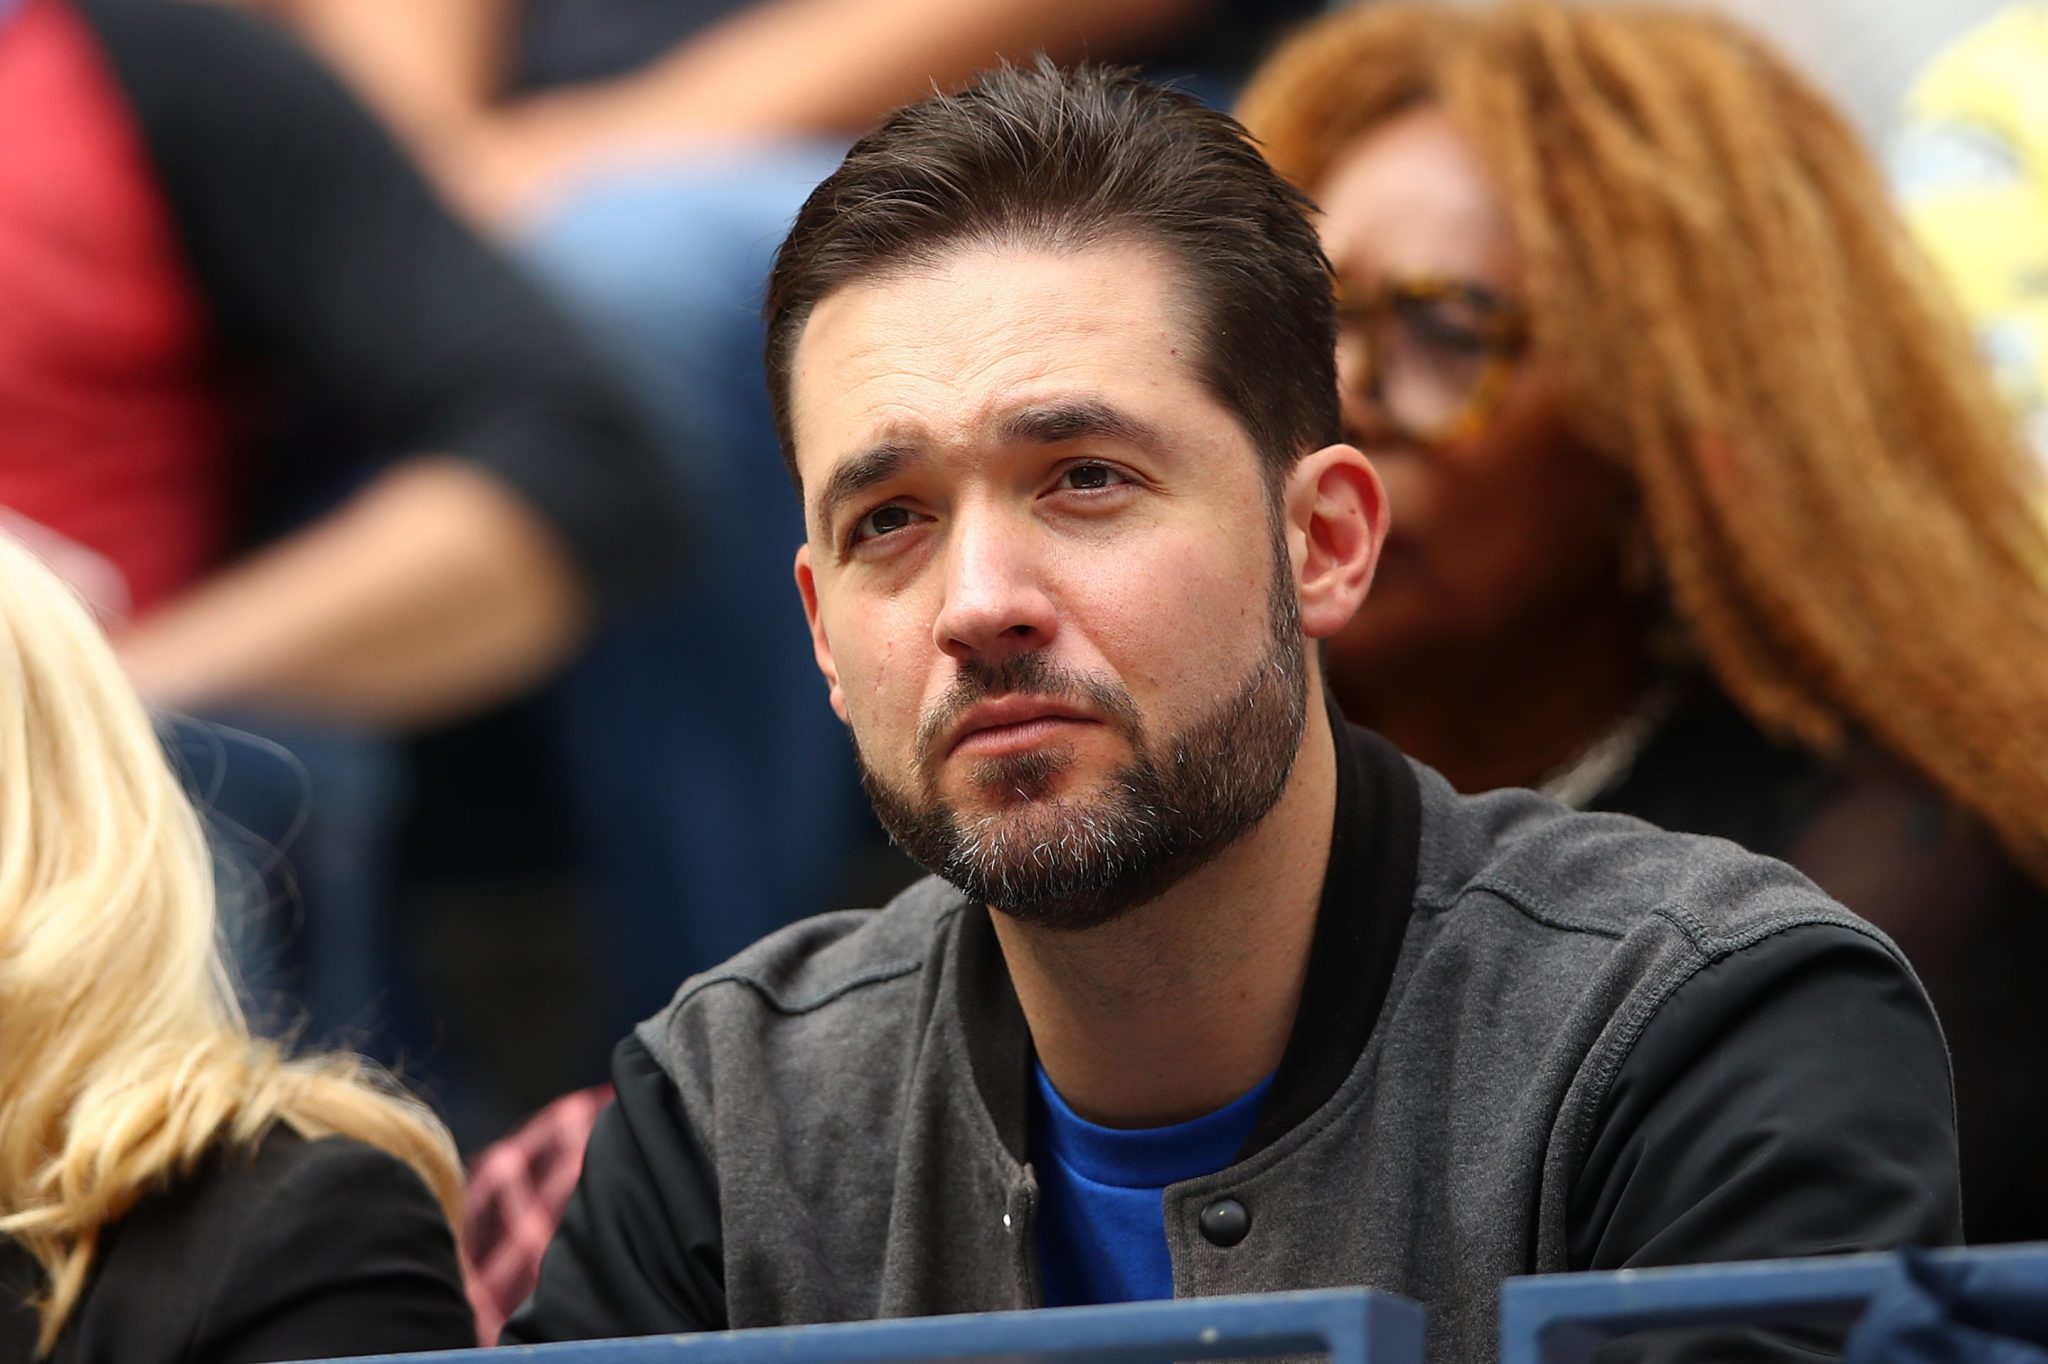 Alexis Ohanian shrugs off omission from Reddit IPO filing